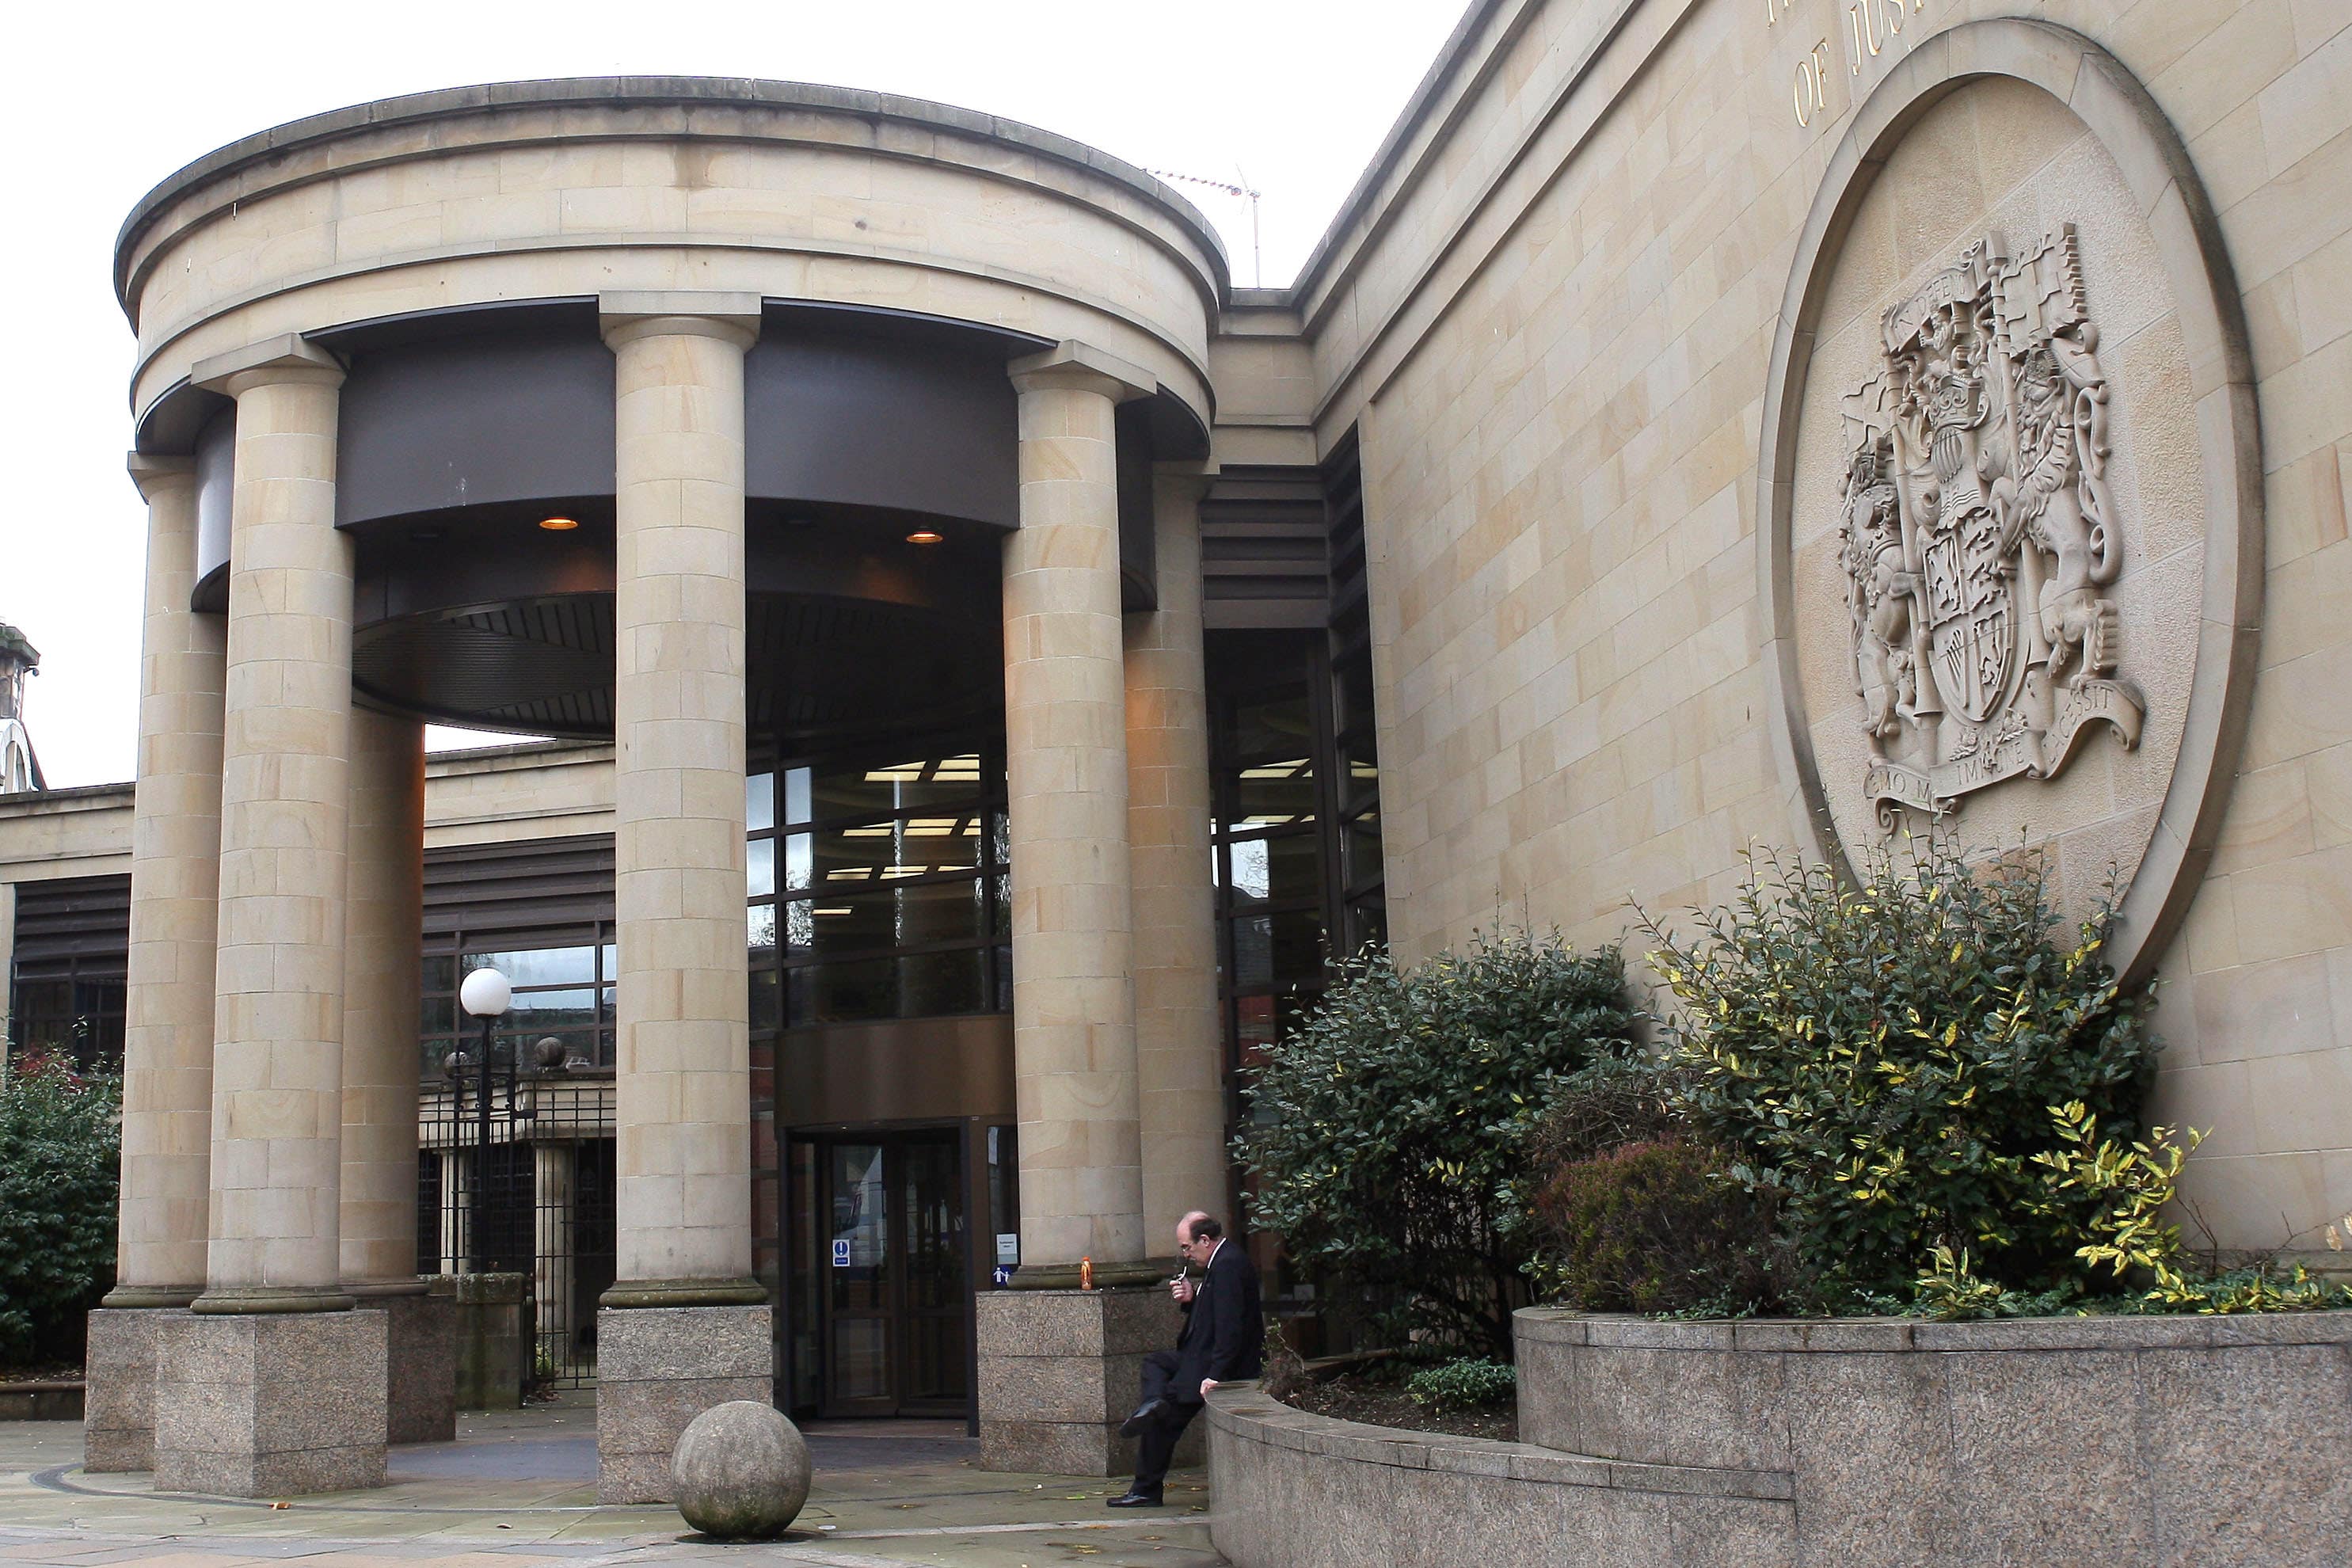 Woman ‘so scared’ during alleged rape, court told | The Independent